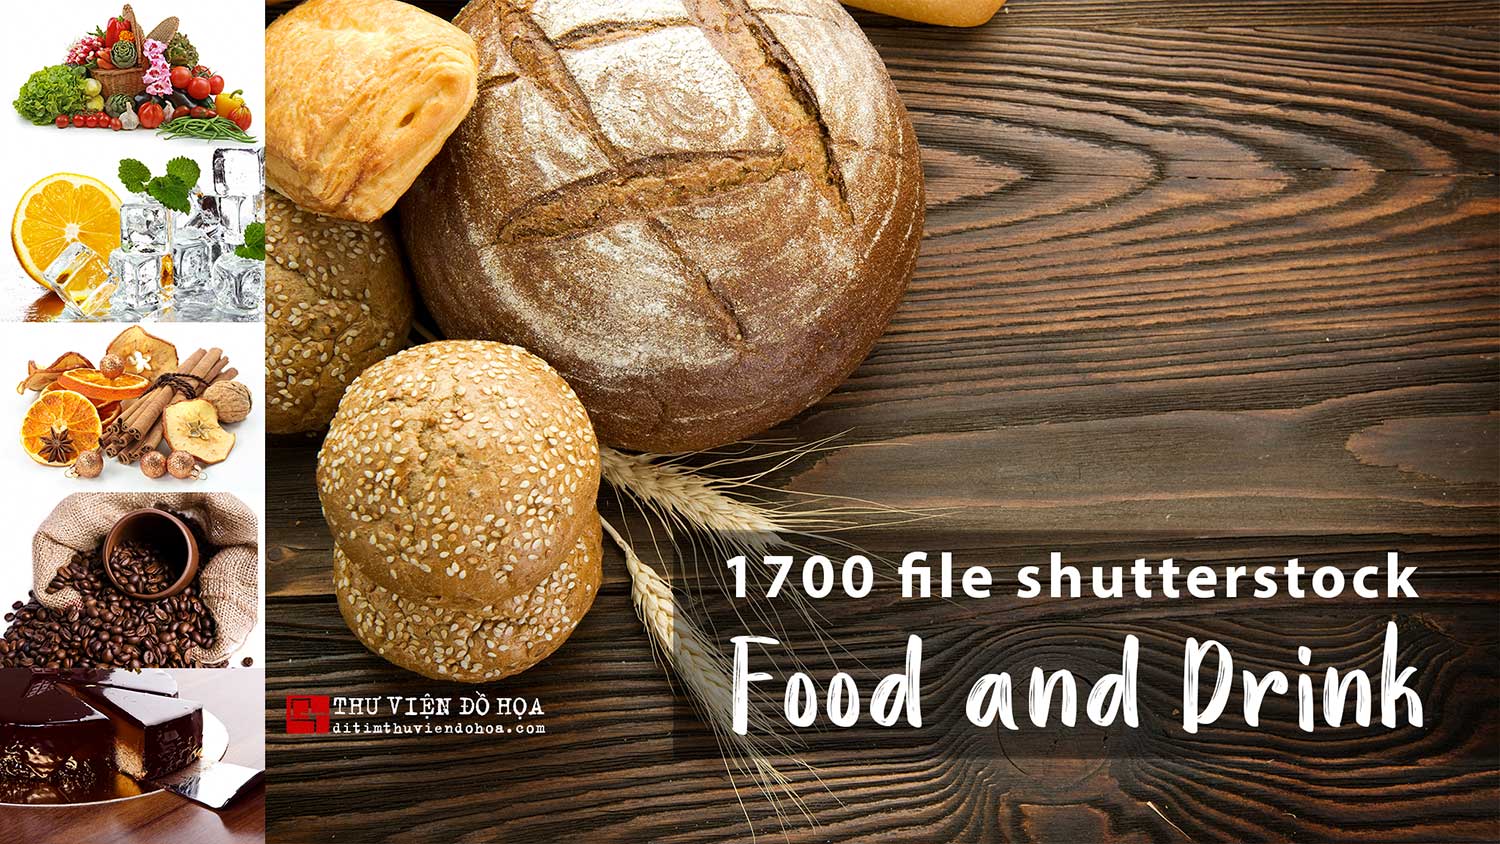 [ Stock ] 1700 file shutterstock Food and Drink